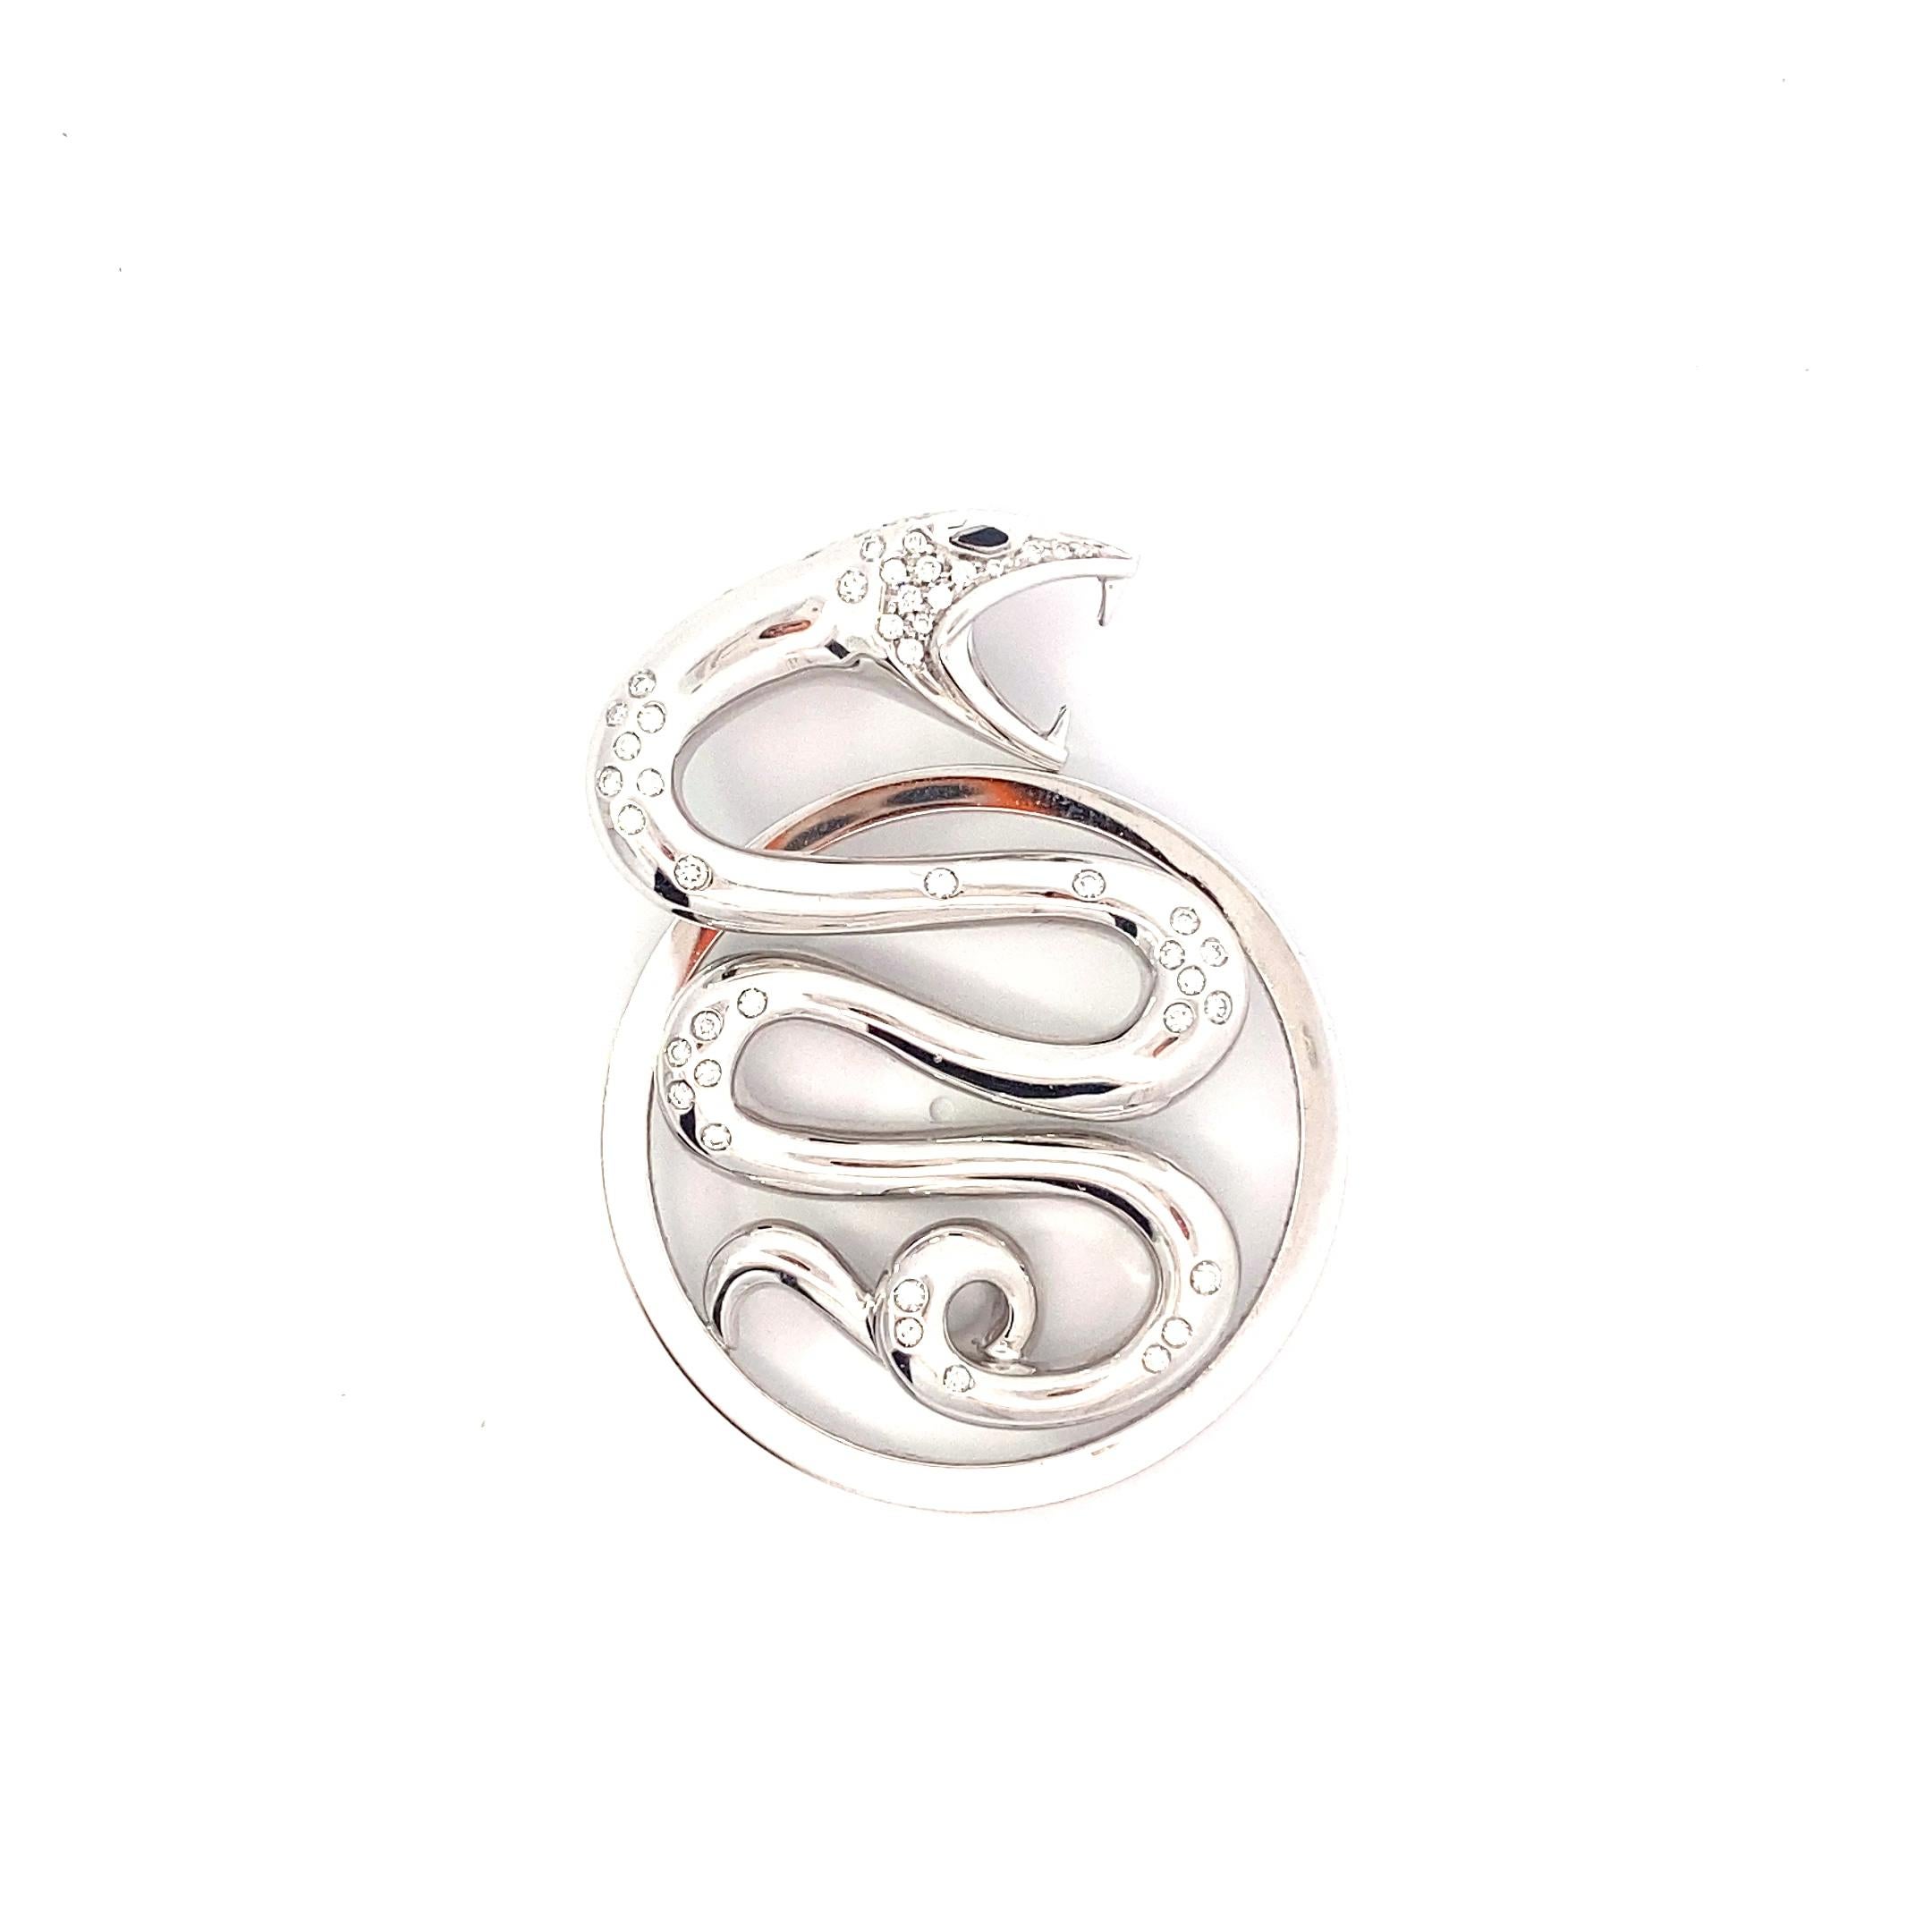 Released as part of the Trouble Collection, this Boucheron 18k white gold diamond detailed snake pendant is an incredible piece that is both fashionable and fire.  Produced in France, this pendant was originally sold on a black leather cord. This